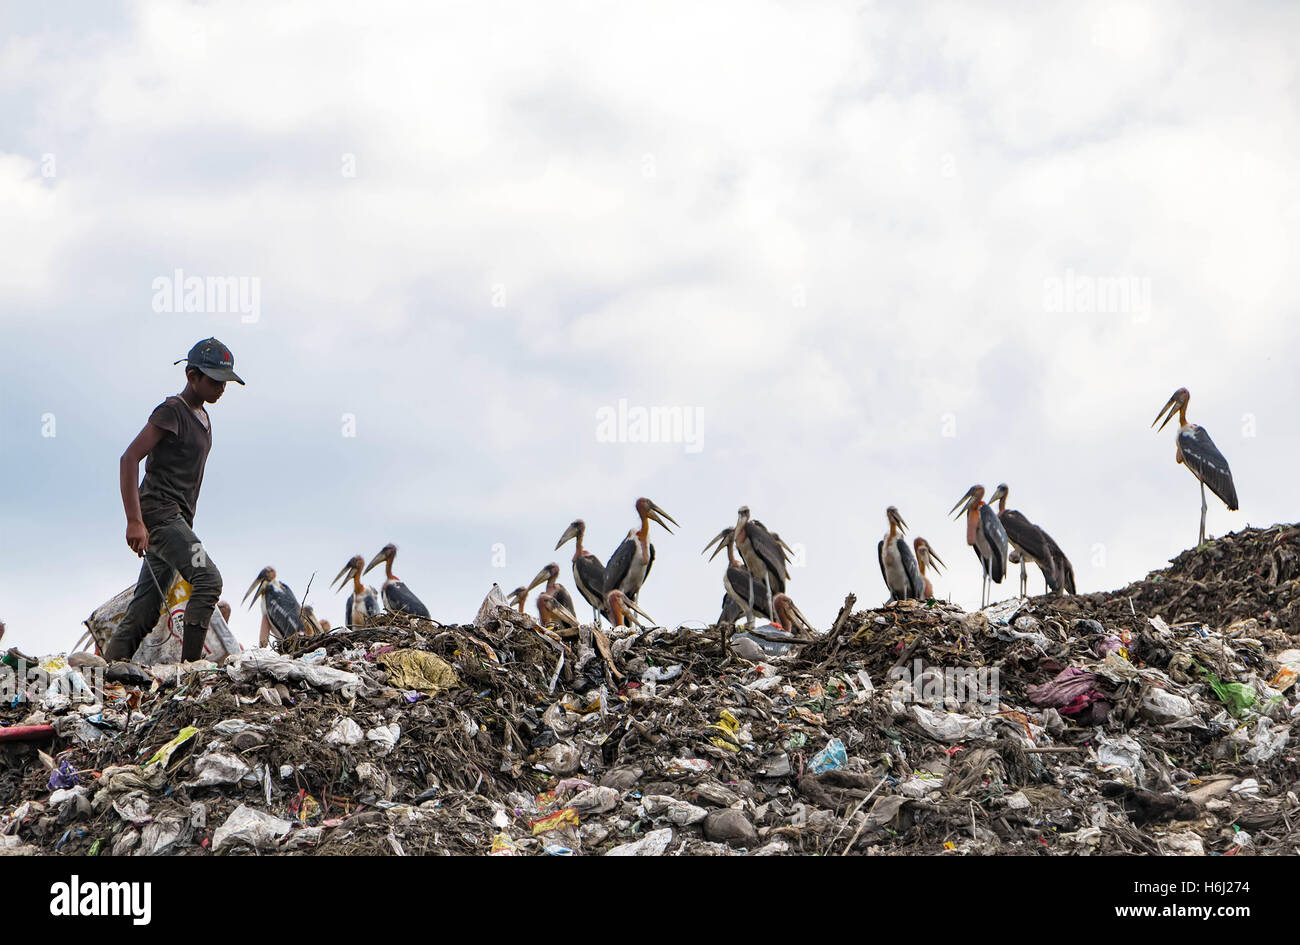 Guwahati, Assam, India. 29th Oct, 2016. A rag picker youth searching for recyclable waste from the solid waste dumping yard while a flock of Greater Adjutant Stork (Leptoptilos dubius) looks upon at outskirt of Guwahati city. Greater Adjutant Stork are among the world's most endangered of the stork species. This dumping yard is considered as a secure home for Greater Adjutant Stork. © Vikramjit Kakati/ZUMA Wire/Alamy Live News Stock Photo